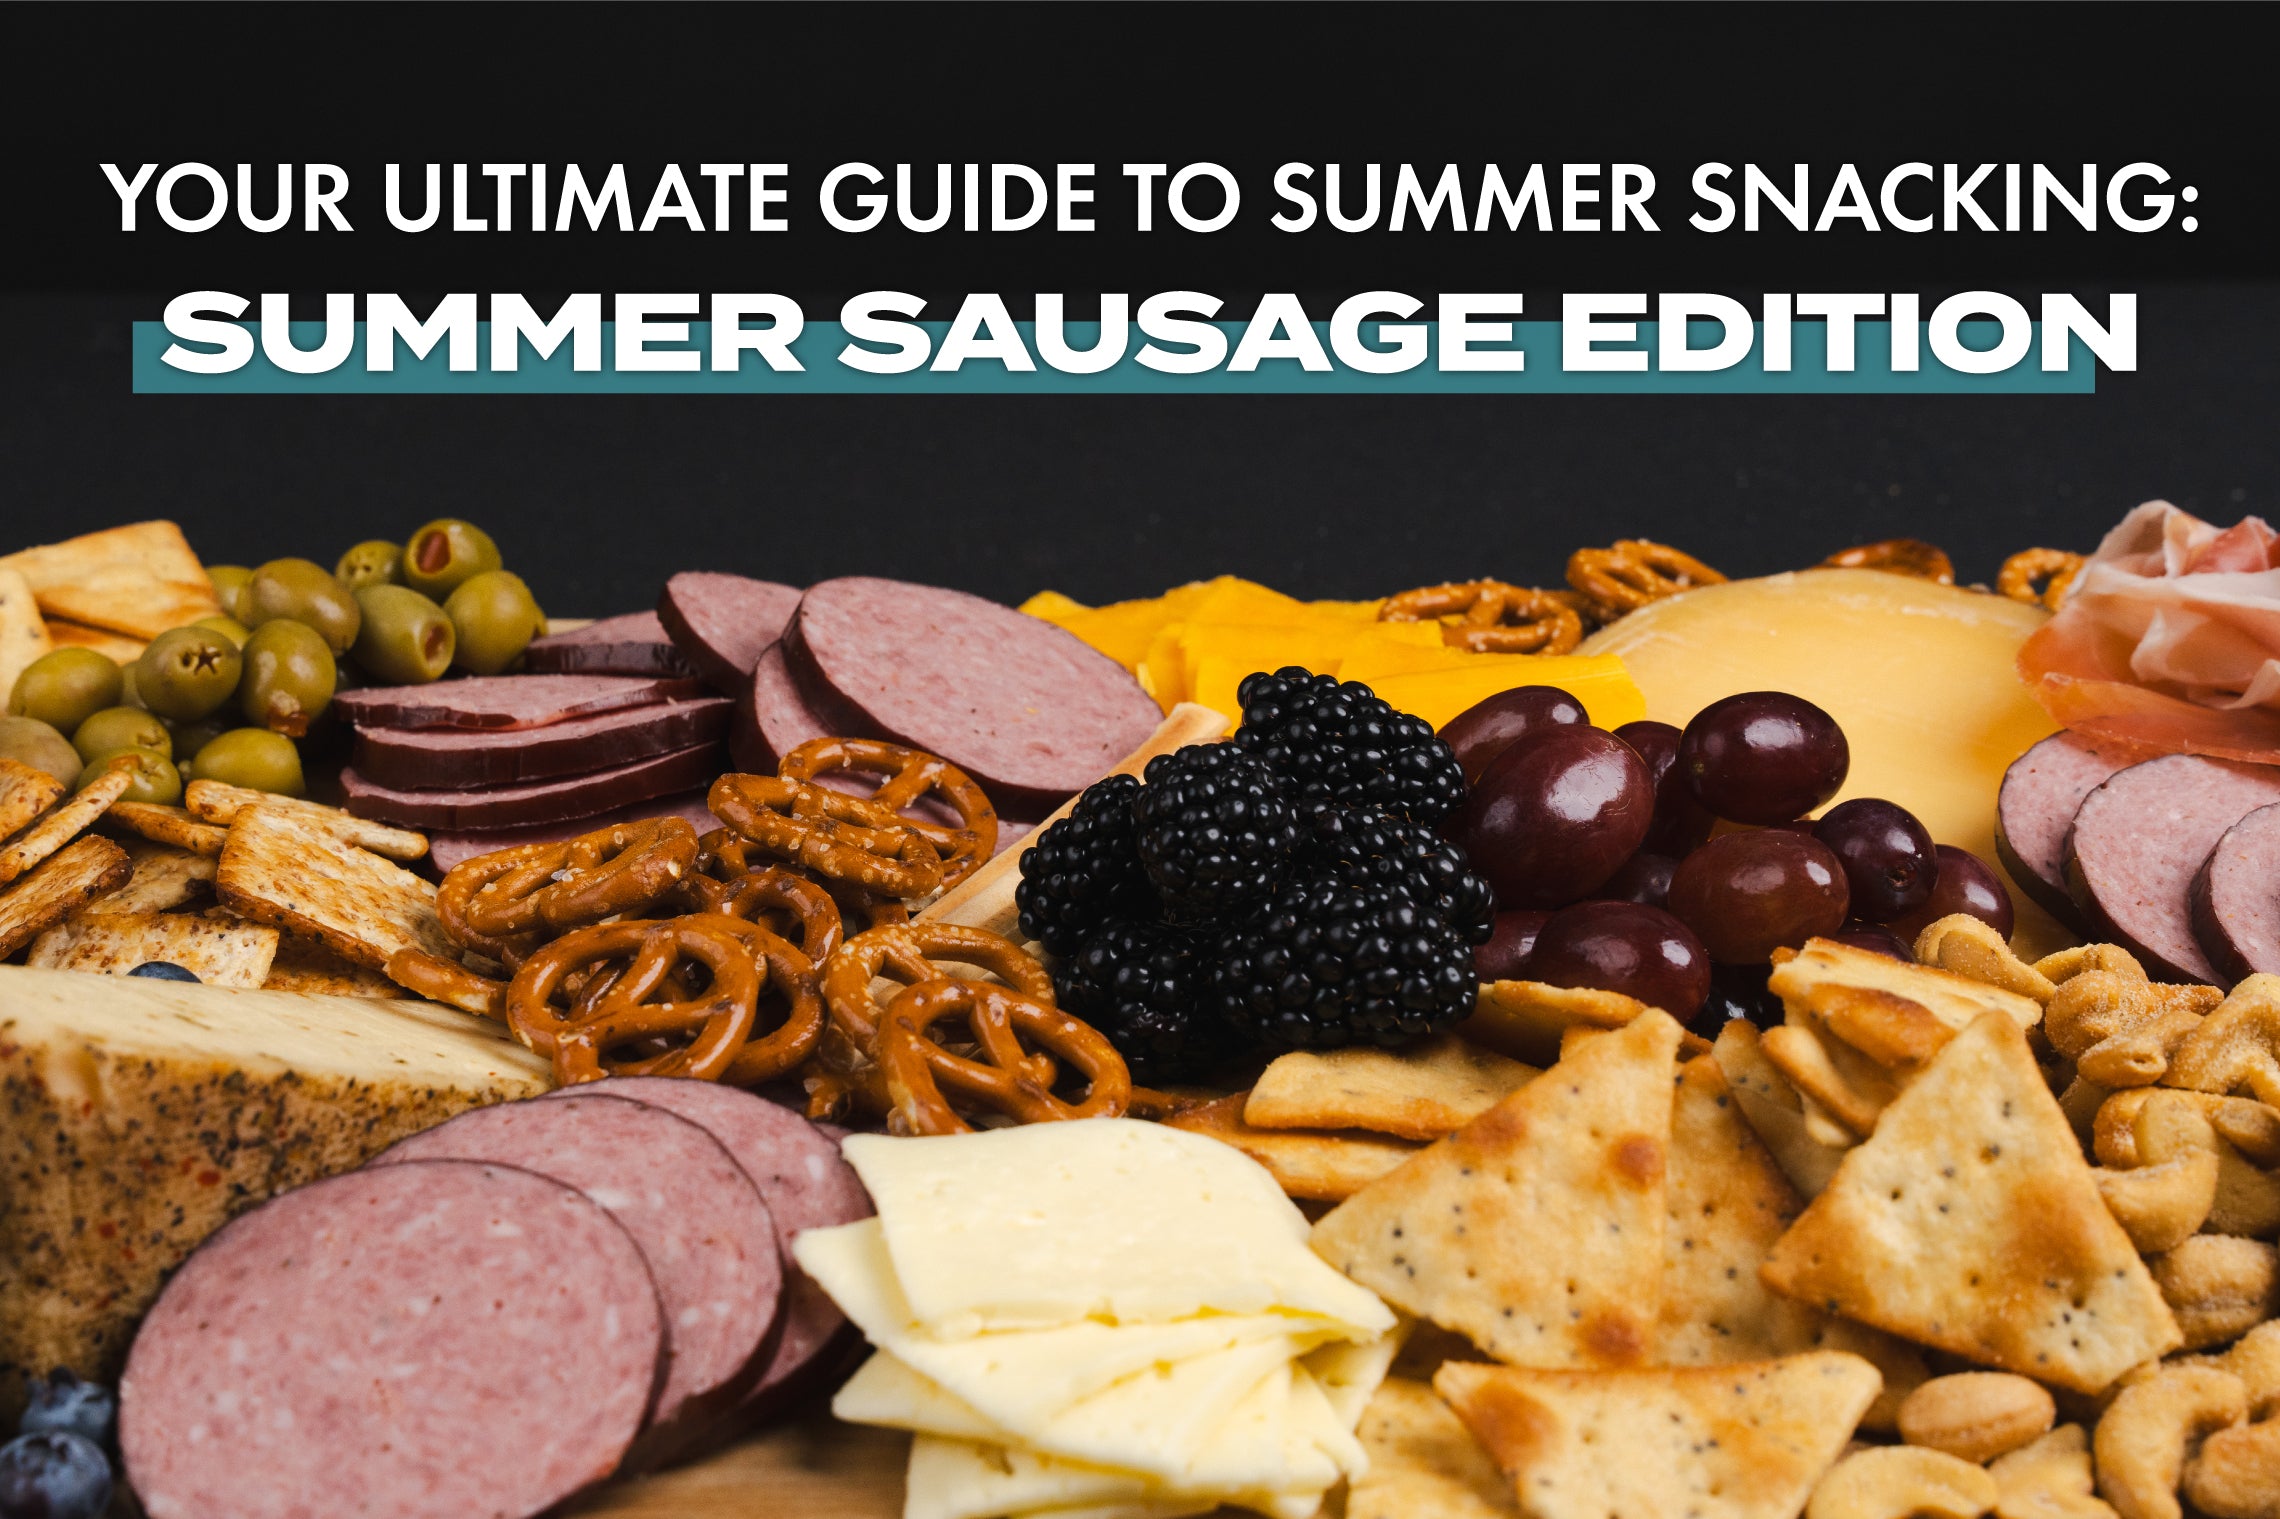 Your Ultimate Guide to Summer Snacking: Summer Sausage Edition